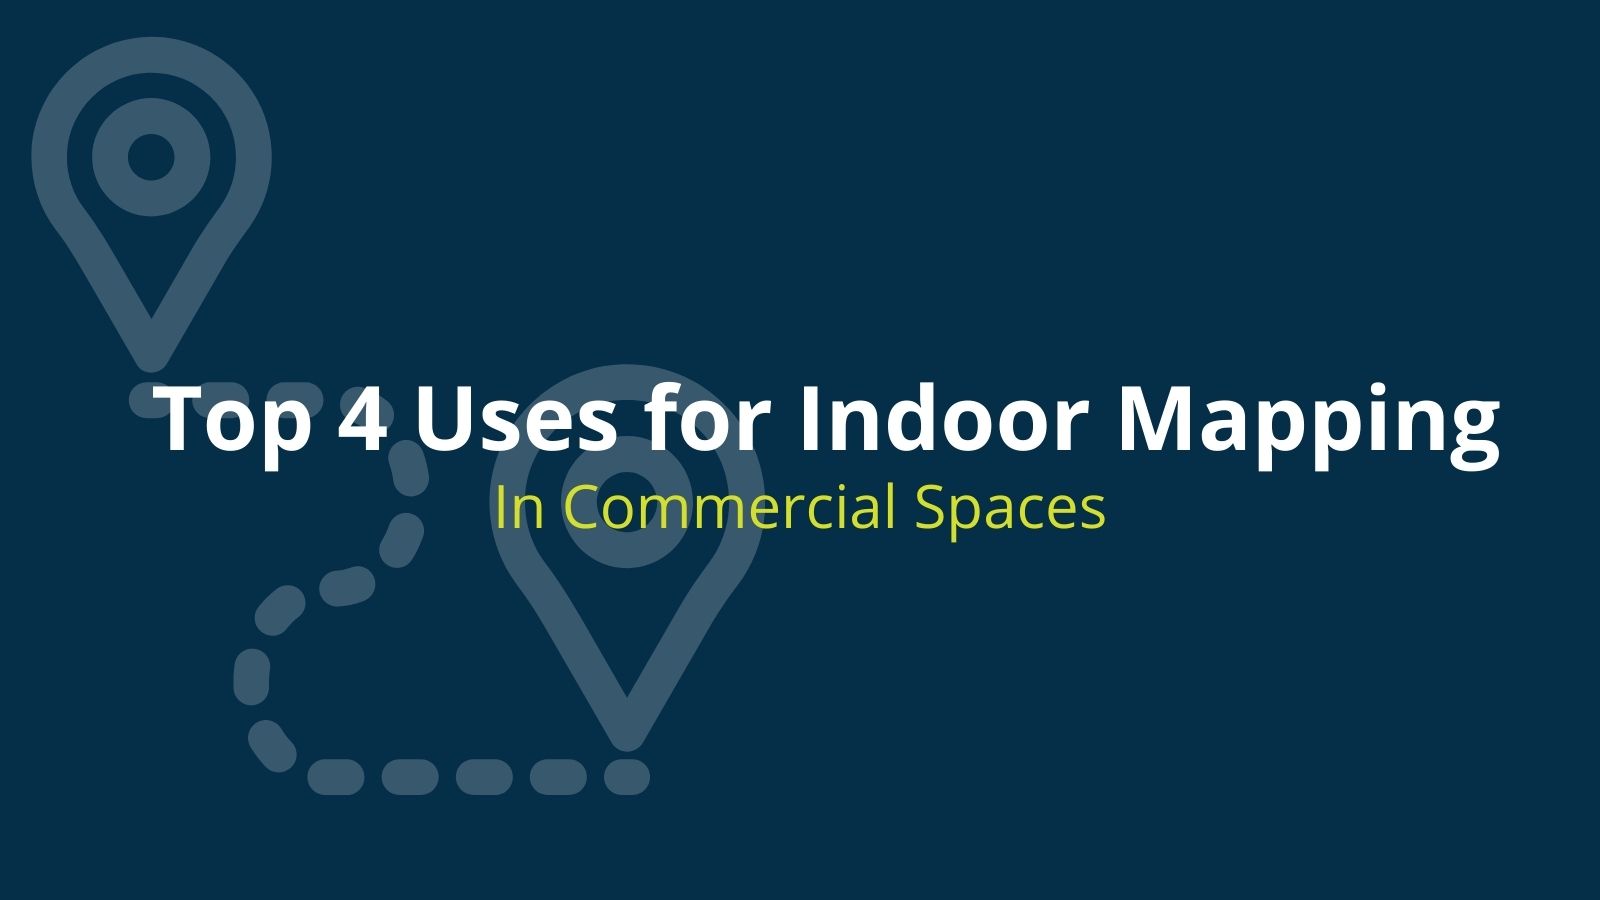 Top 4 Uses for Indoor Mapping in Commercial Spaces text over an image of two location pins connected by a curved dotted line